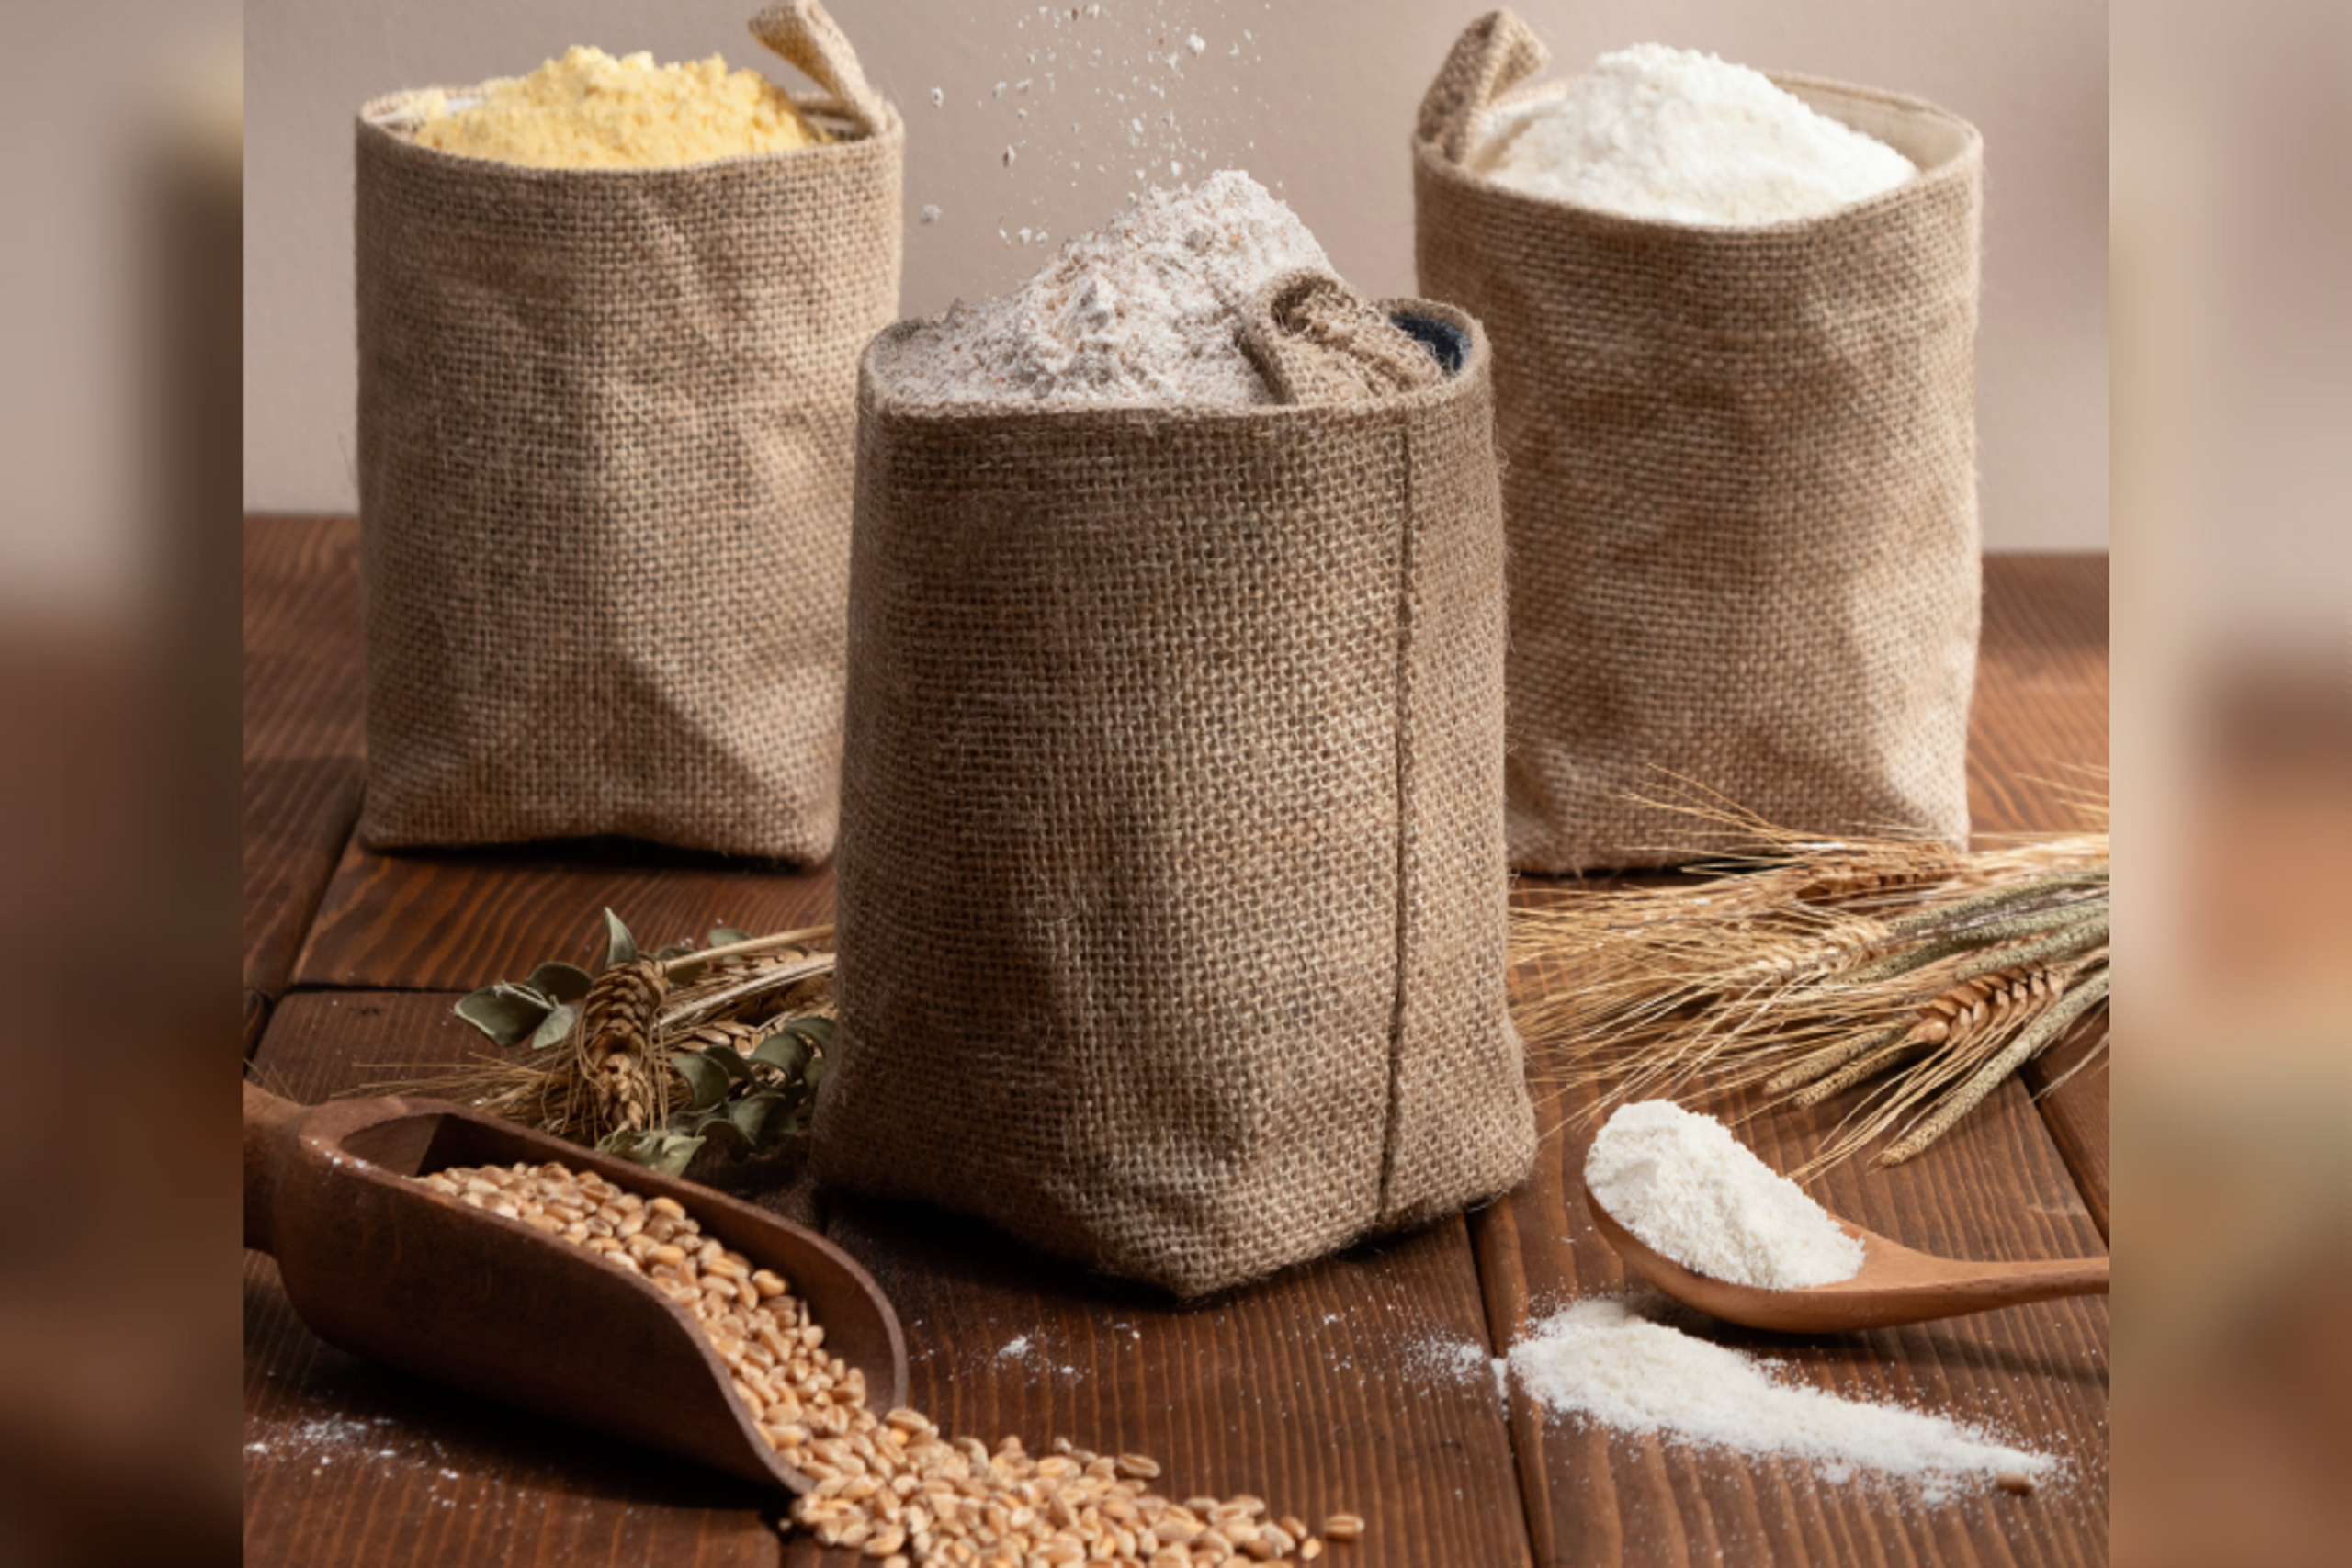 Why should everyone keep a domestic flour mill machine at home?